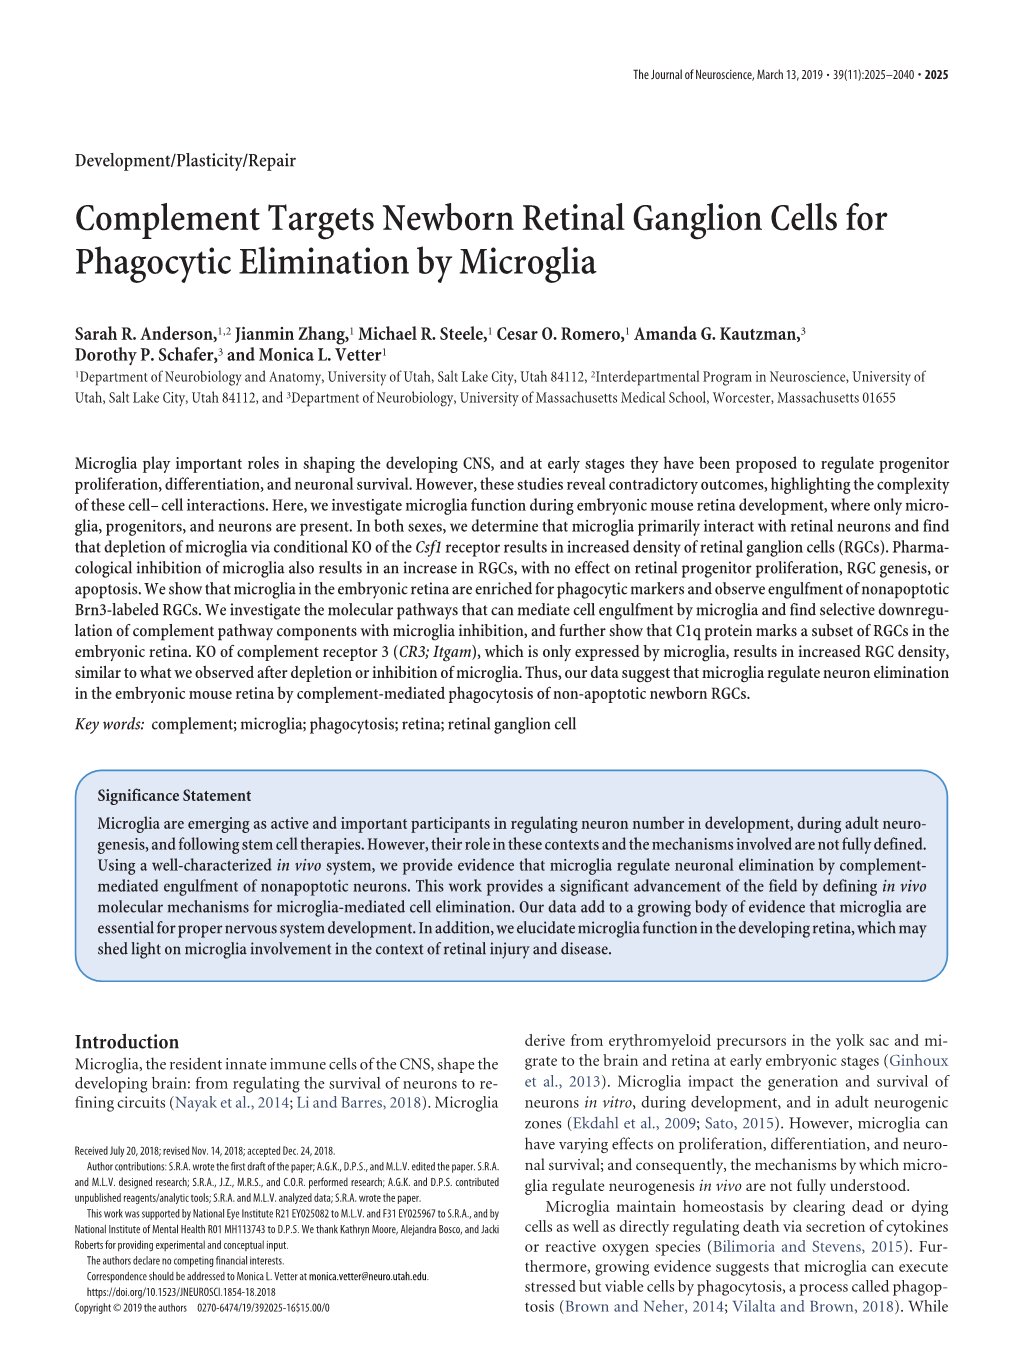 Complement Targets Newborn Retinal Ganglion Cells for Phagocytic Elimination by Microglia